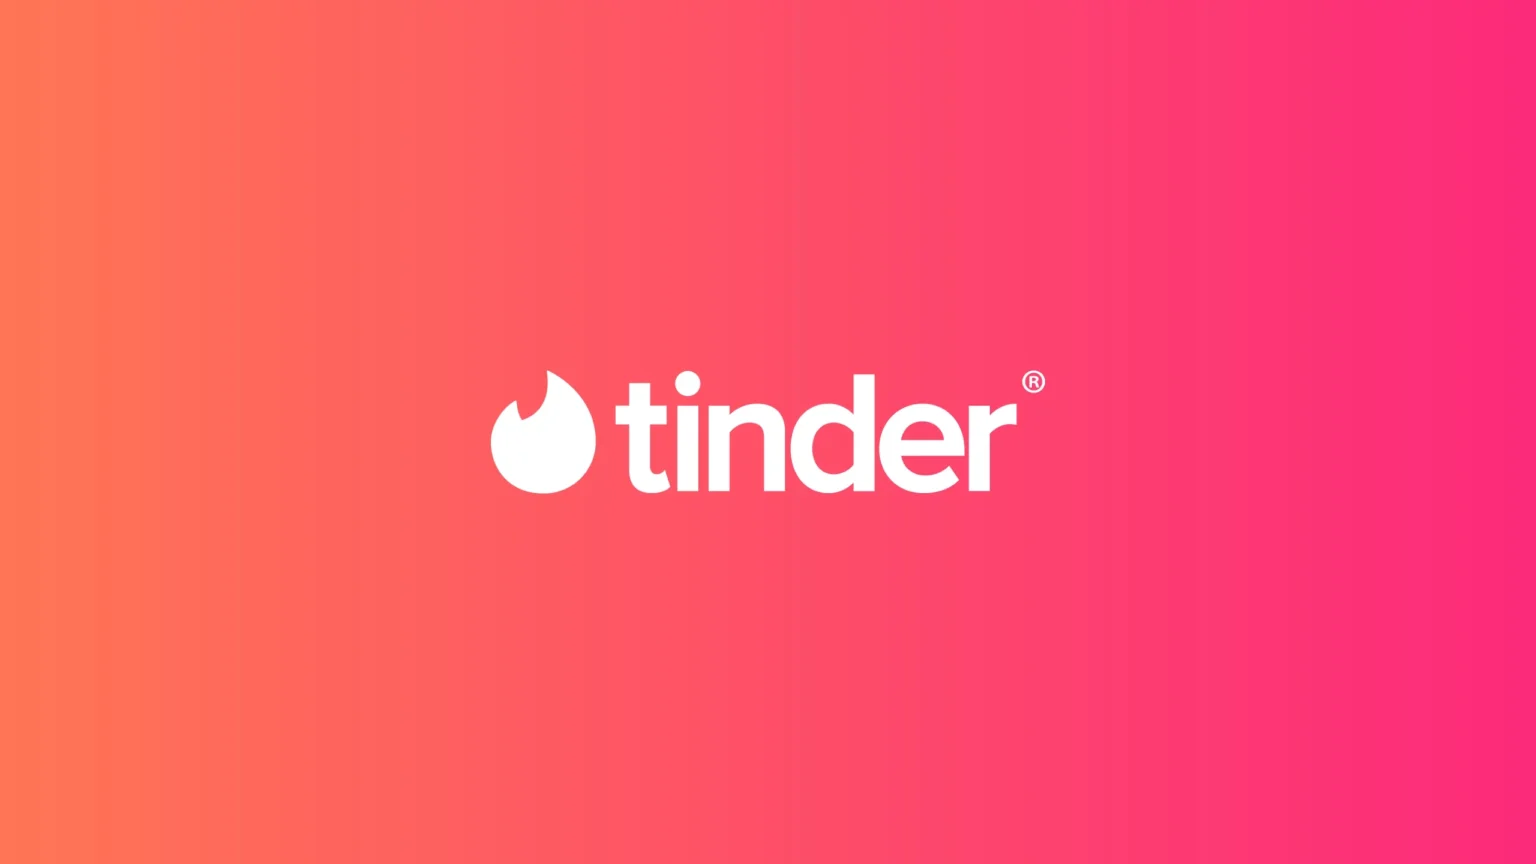 Tinder dating app new features